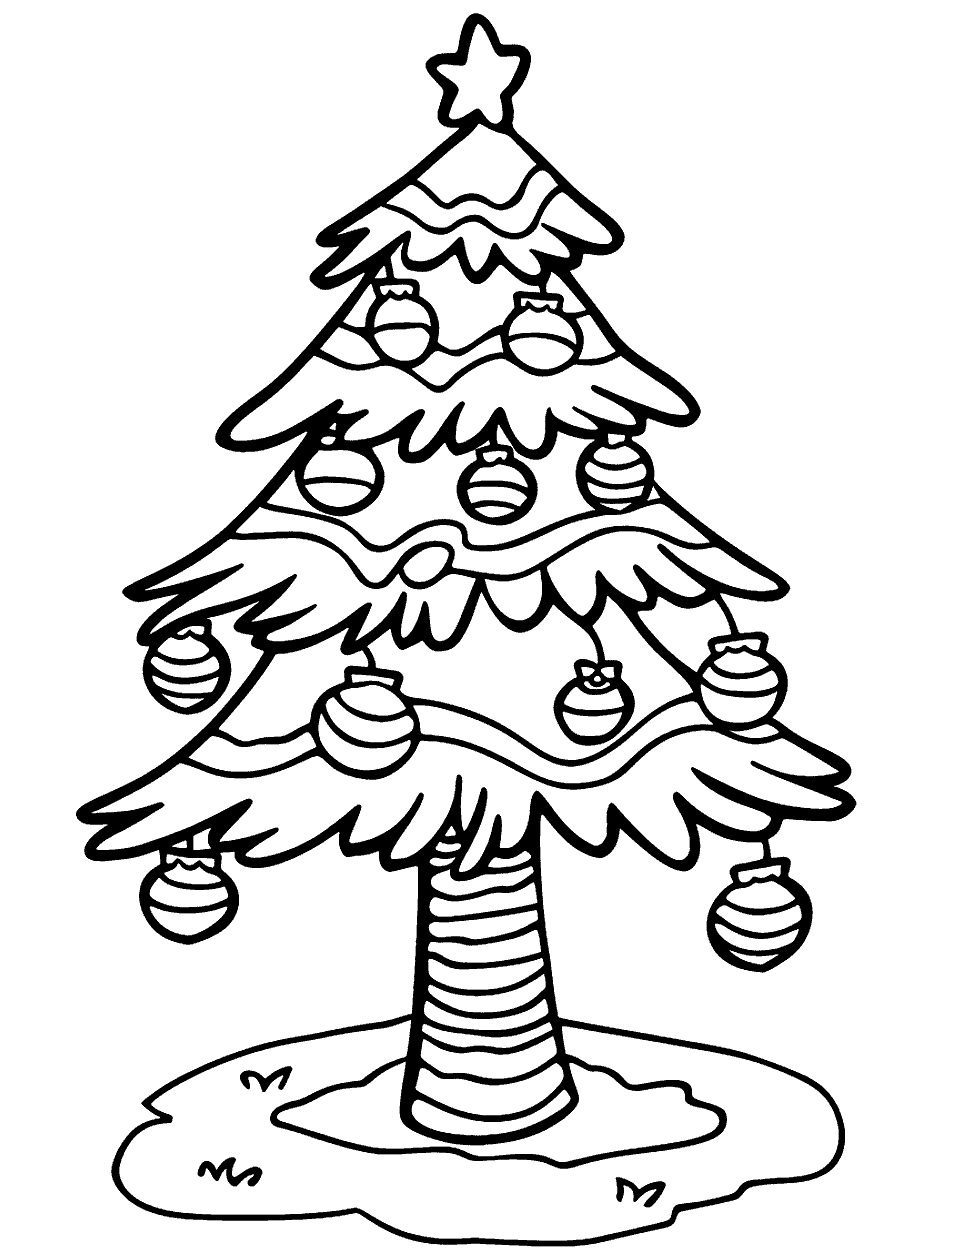 Decorated Christmas Tree Coloring Page - A Christmas tree adorned with ornaments, lights, and a star on top.